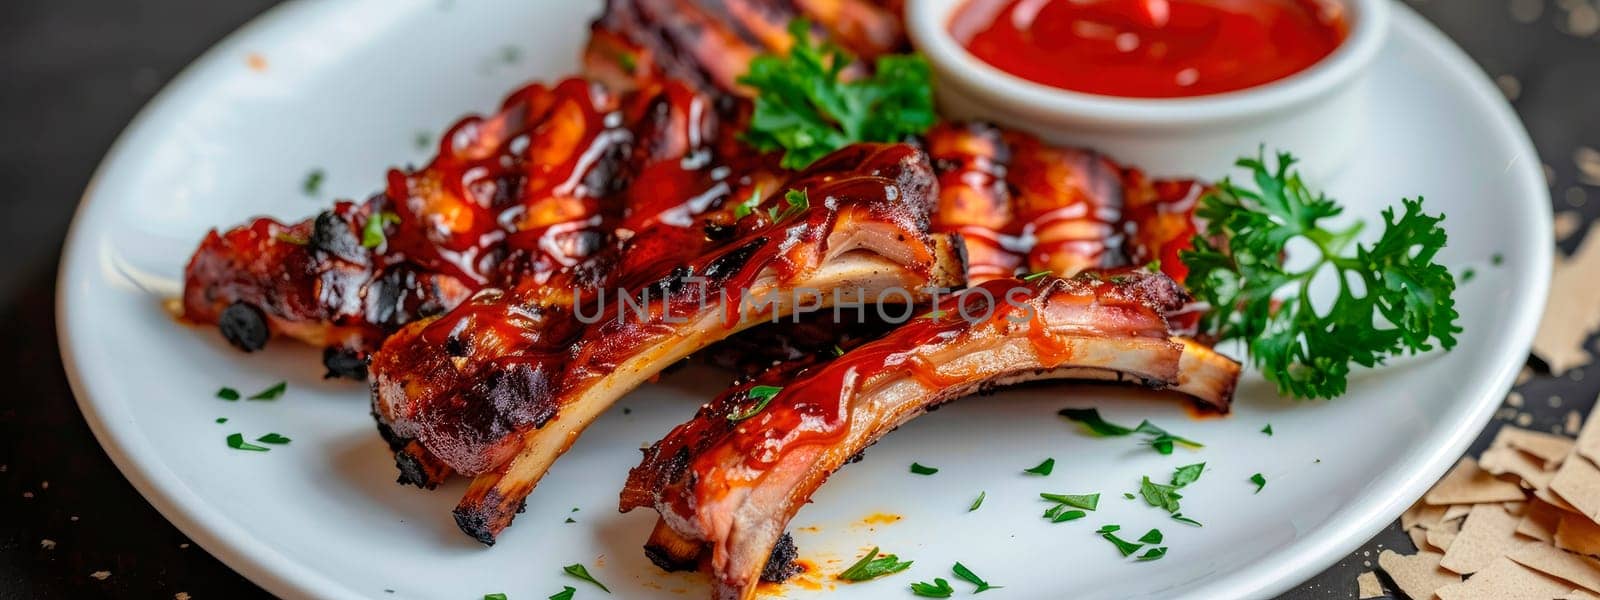 ribs in sauce on a plate. selective focus. by yanadjana